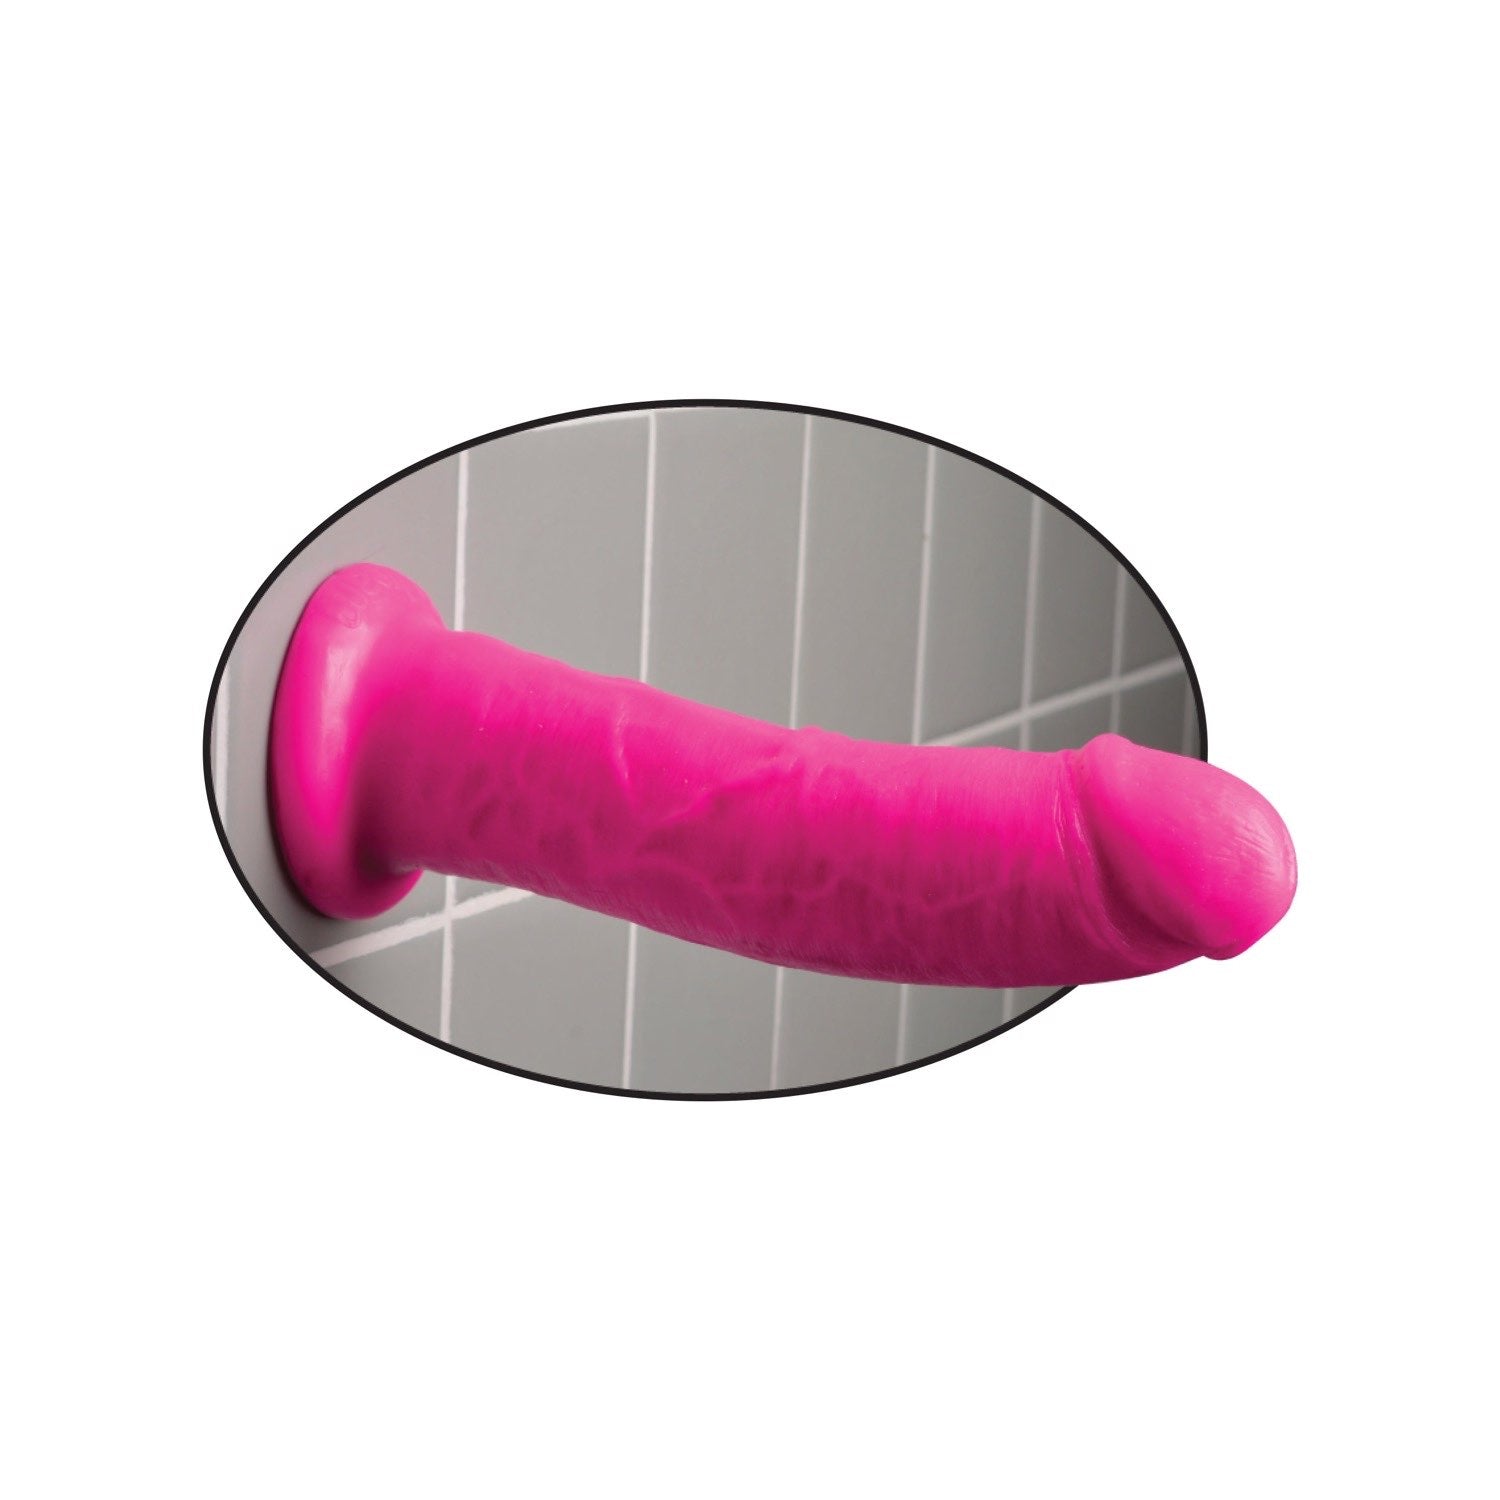 Dillio 8&quot; Dildo - Pink 20.3 cm Dong by Pipedream